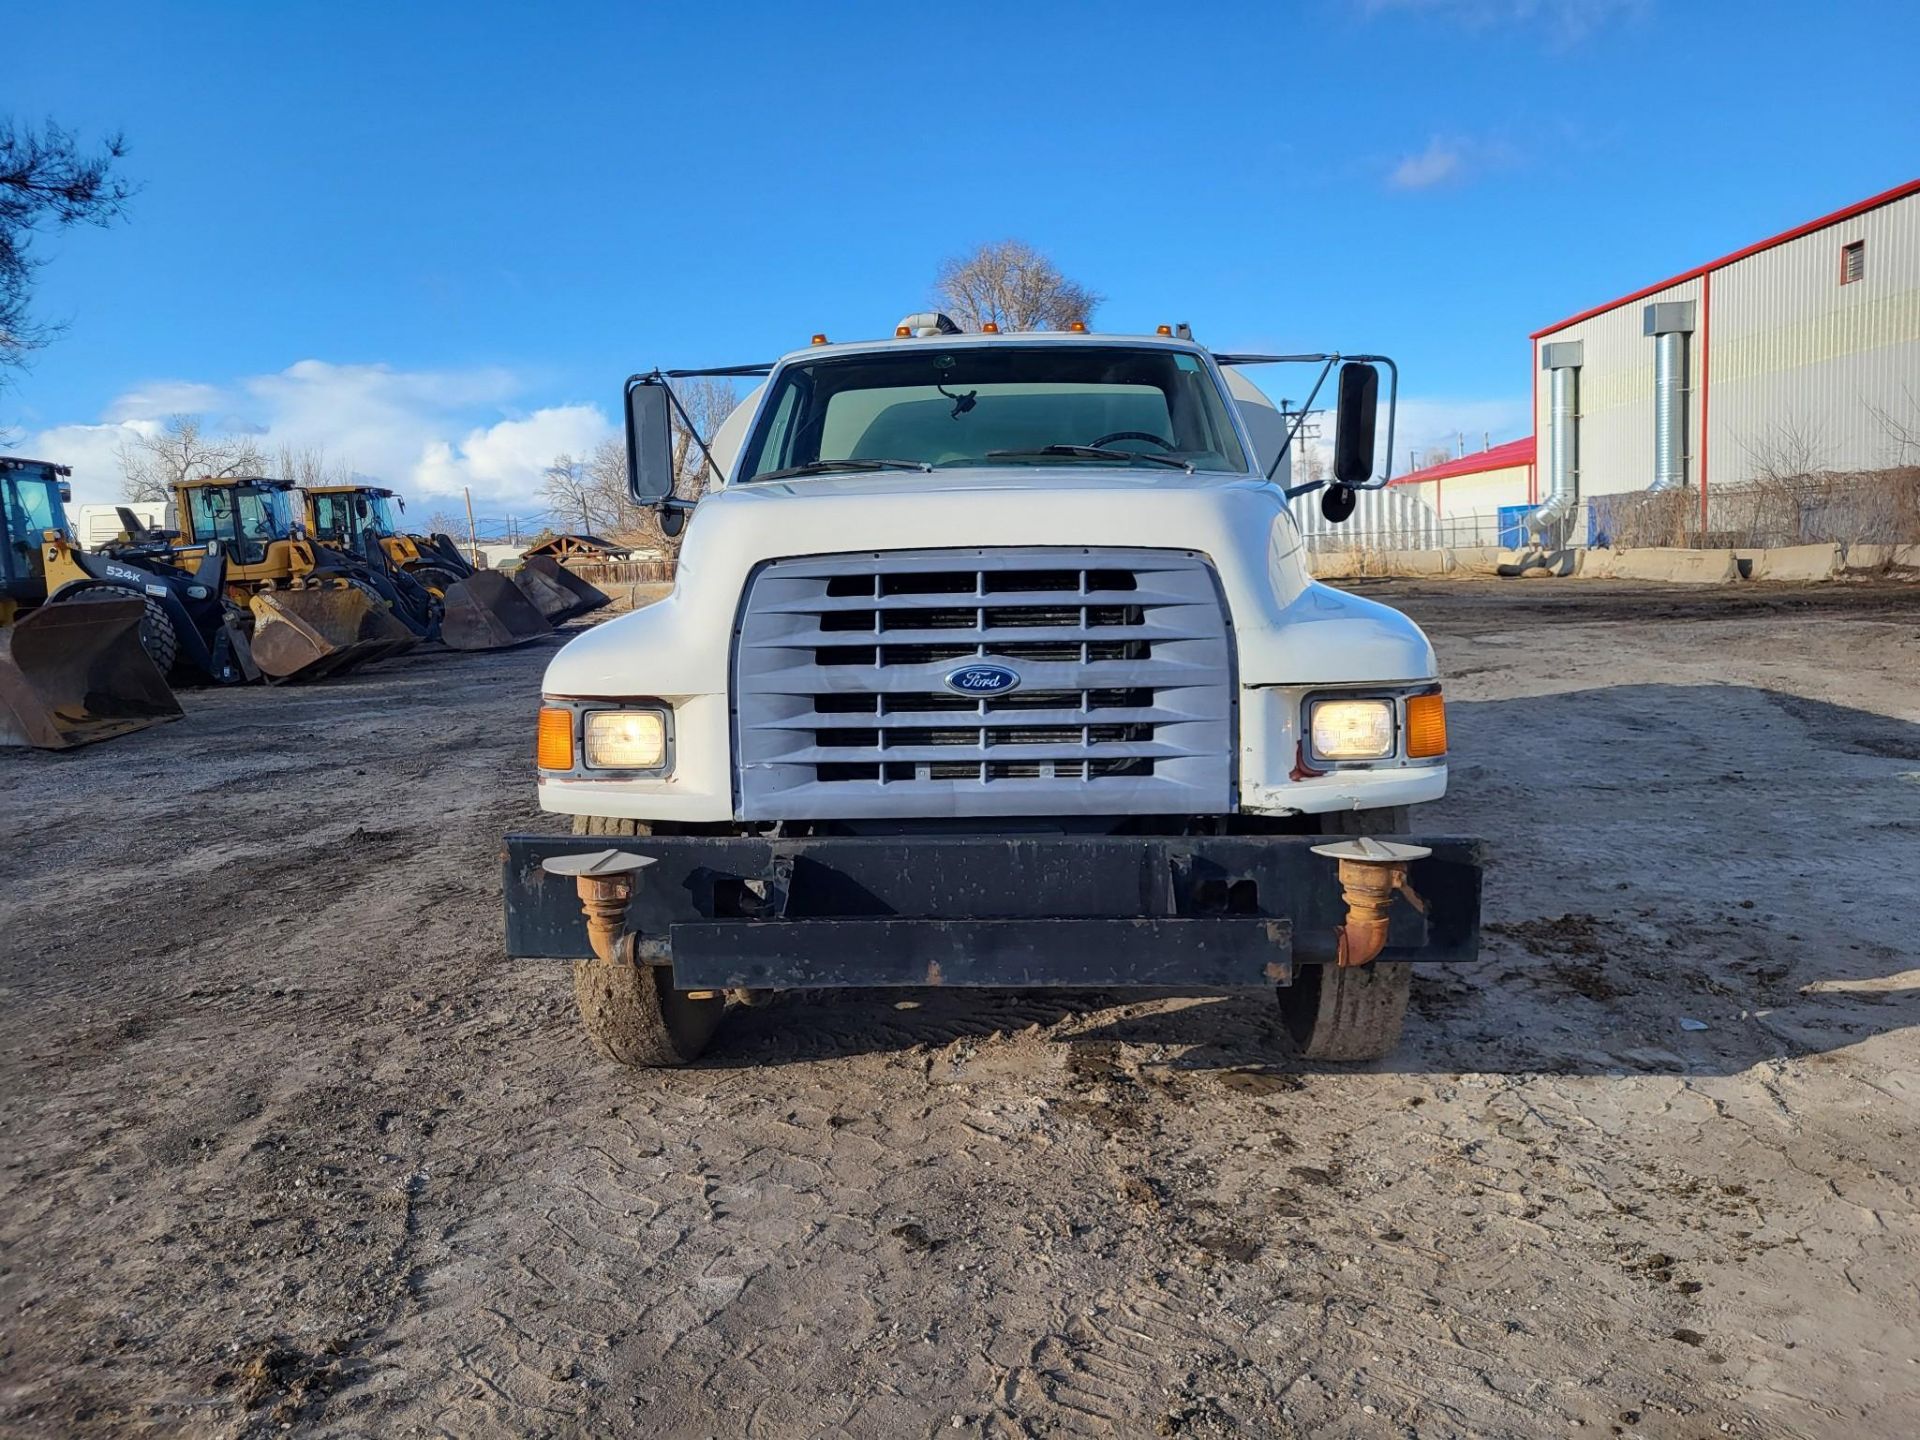 1998 FORD F800 WATER TRUCK, 27,496 MILES - Image 2 of 22